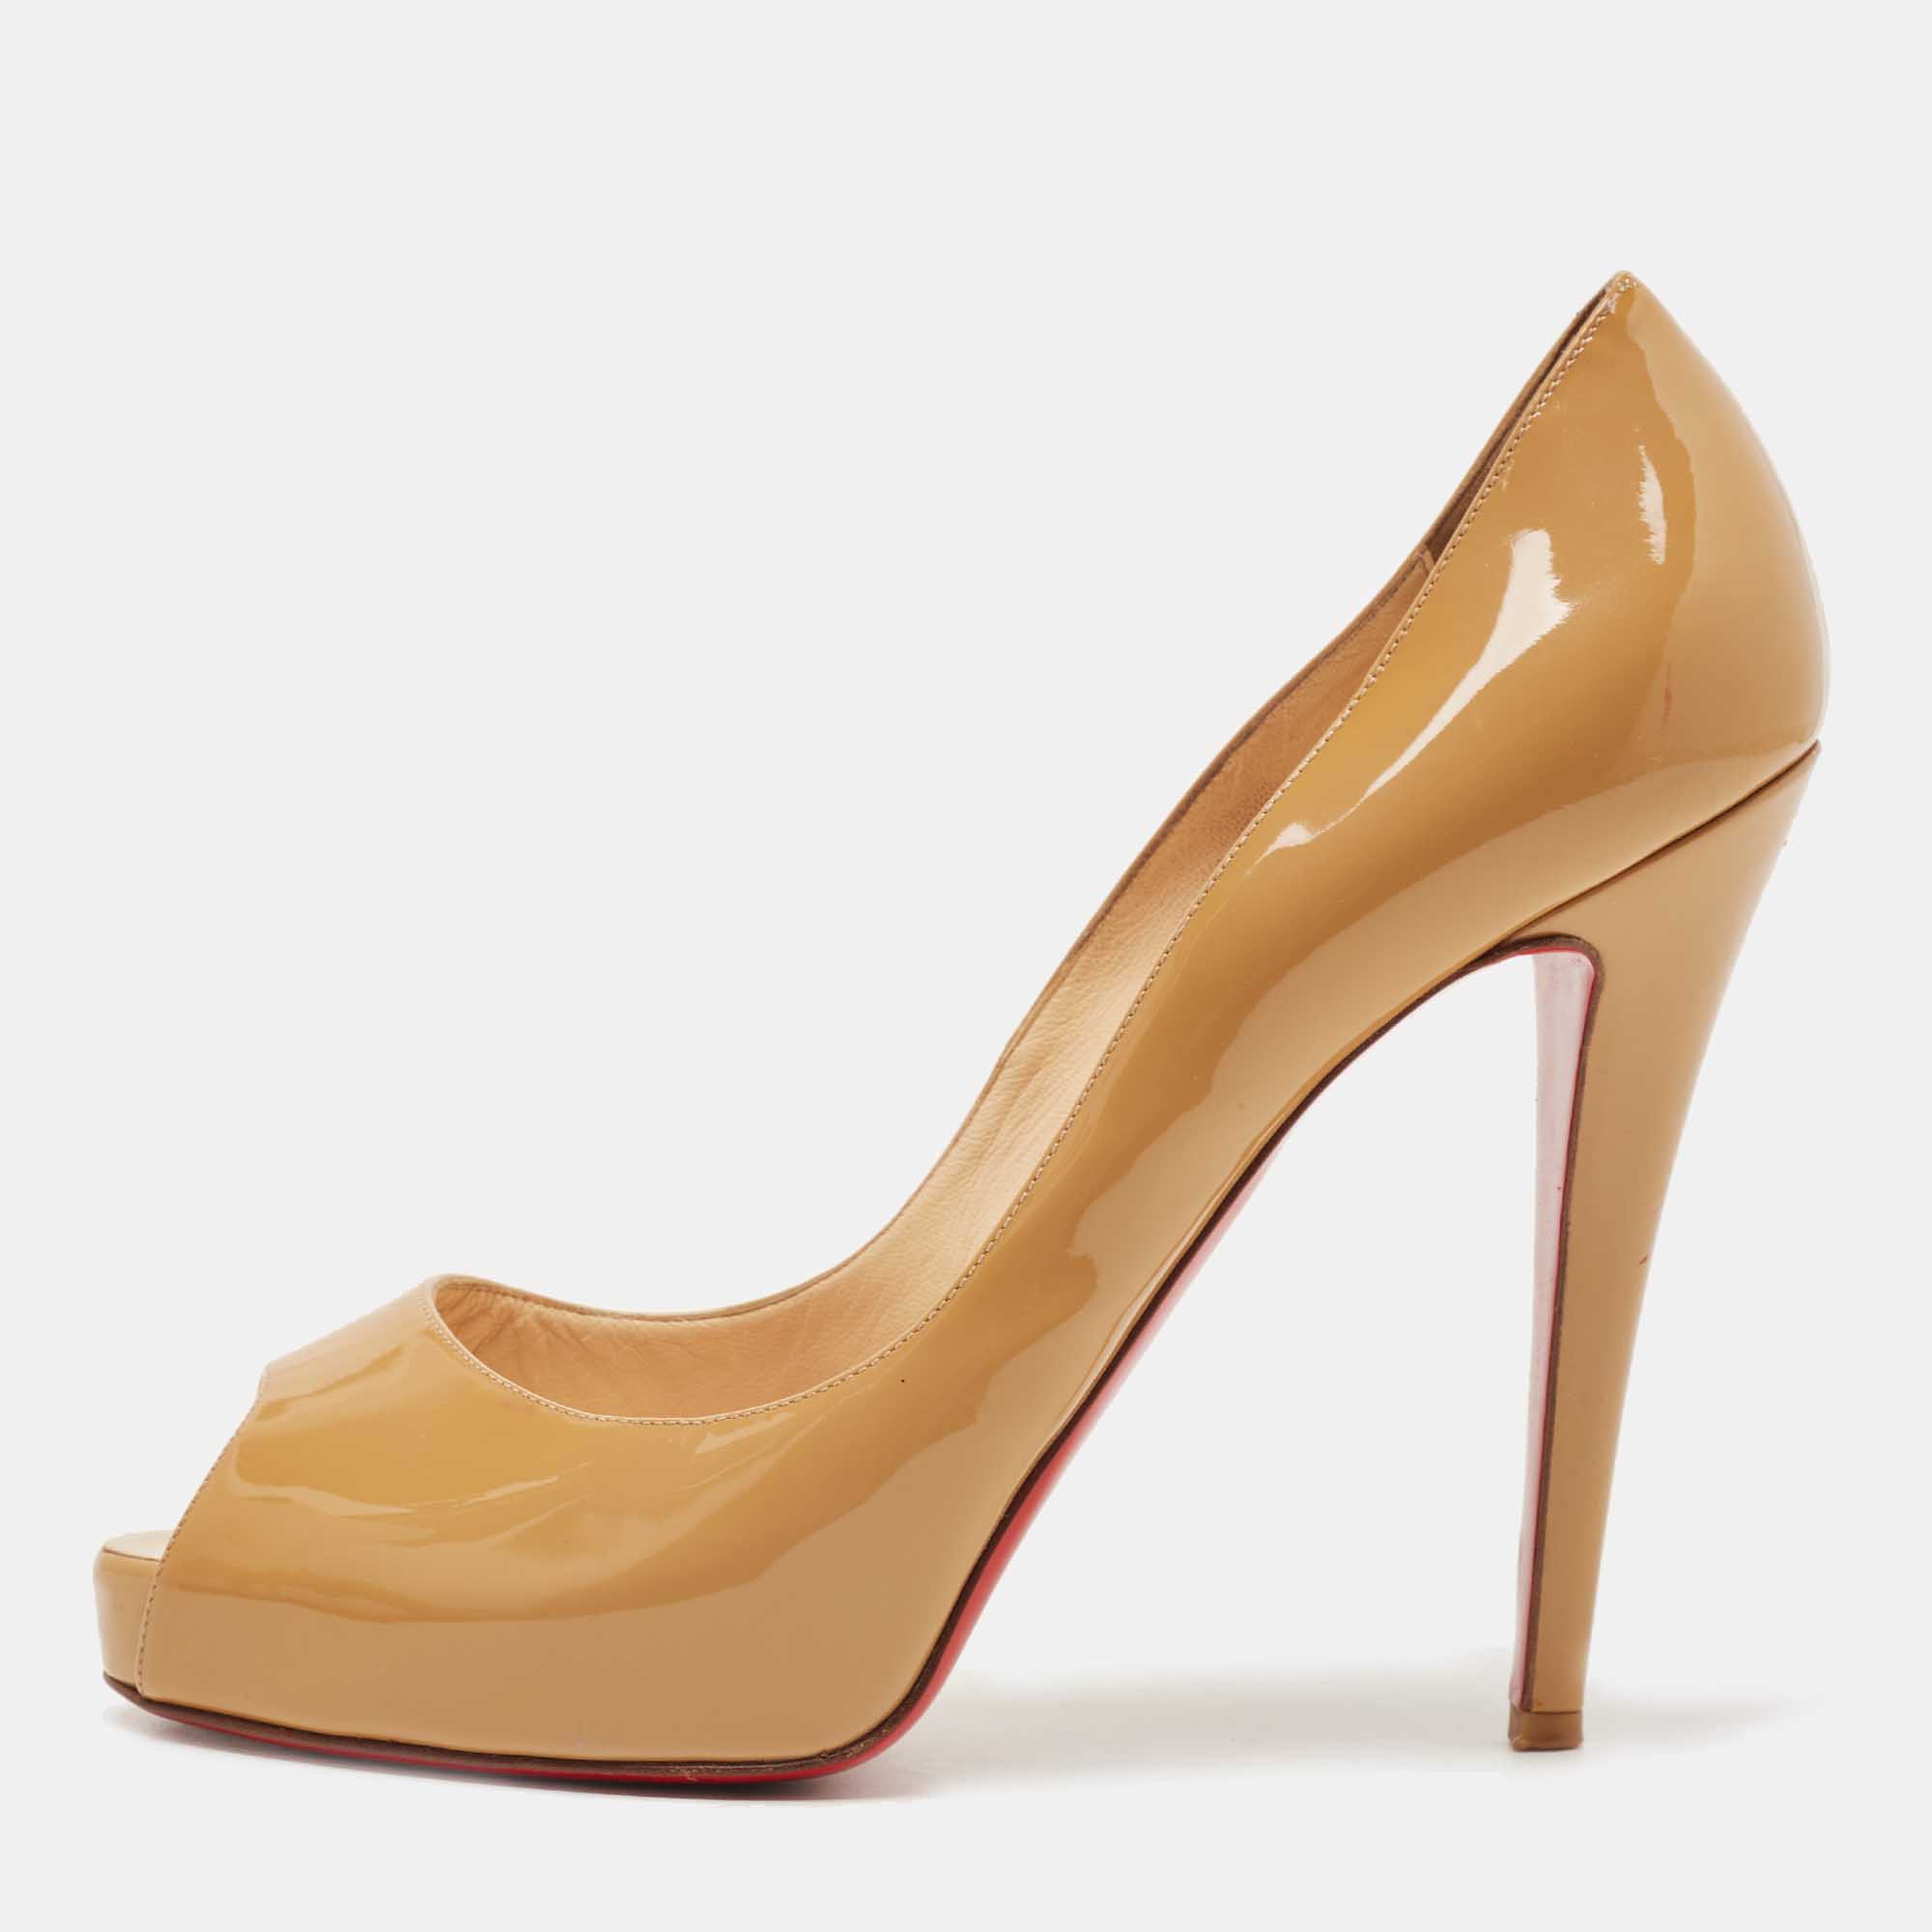 Christian louboutin beige patent leather very prive pumps size 40